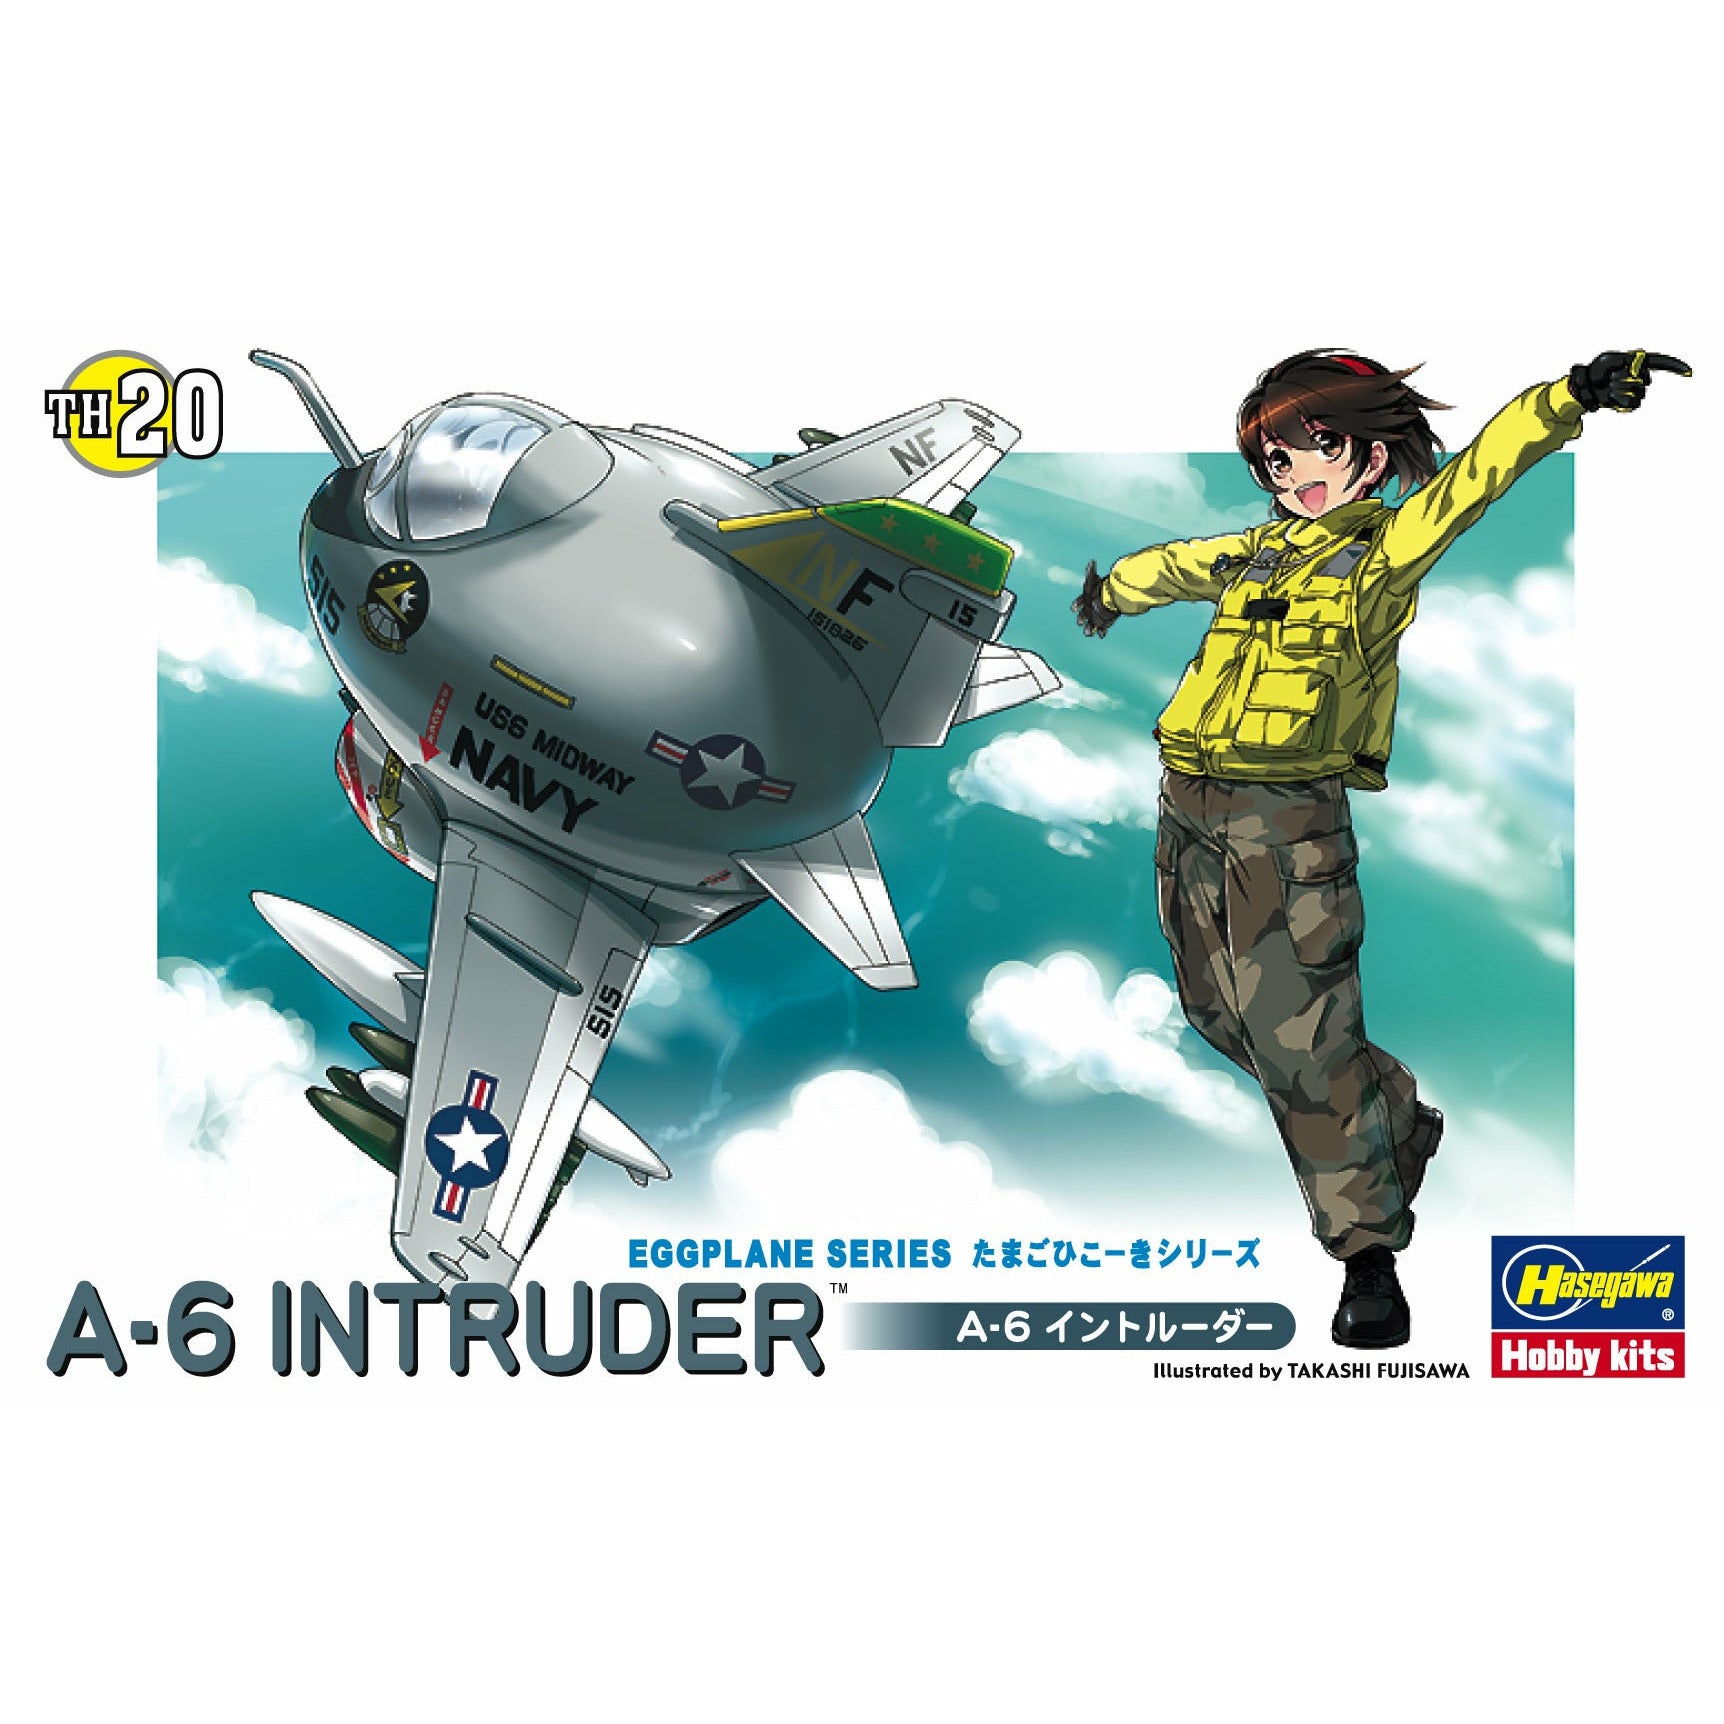 A-6 Intruder in the Eggplane Series #60130 by Hasegawa